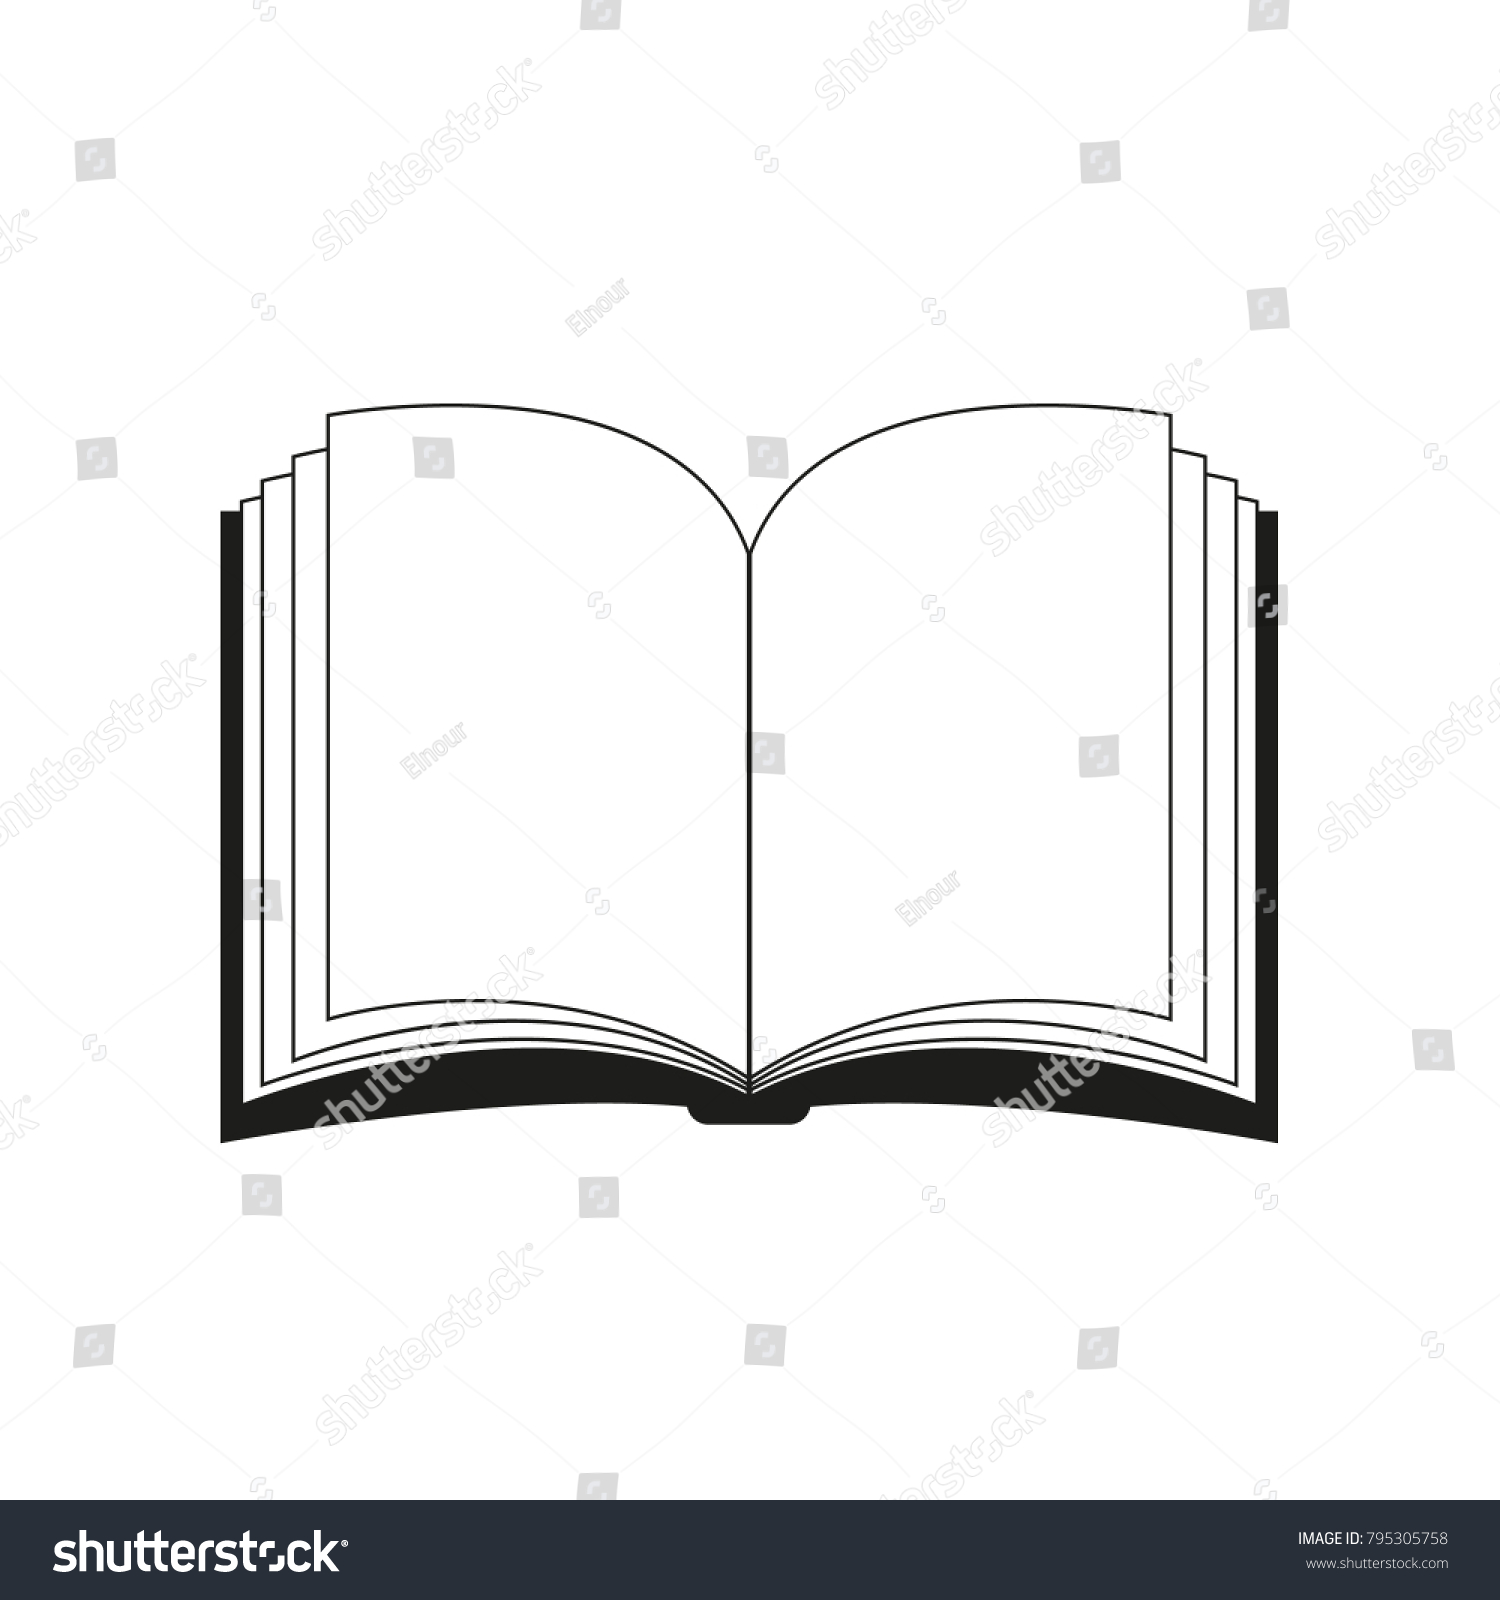 open the book clipart